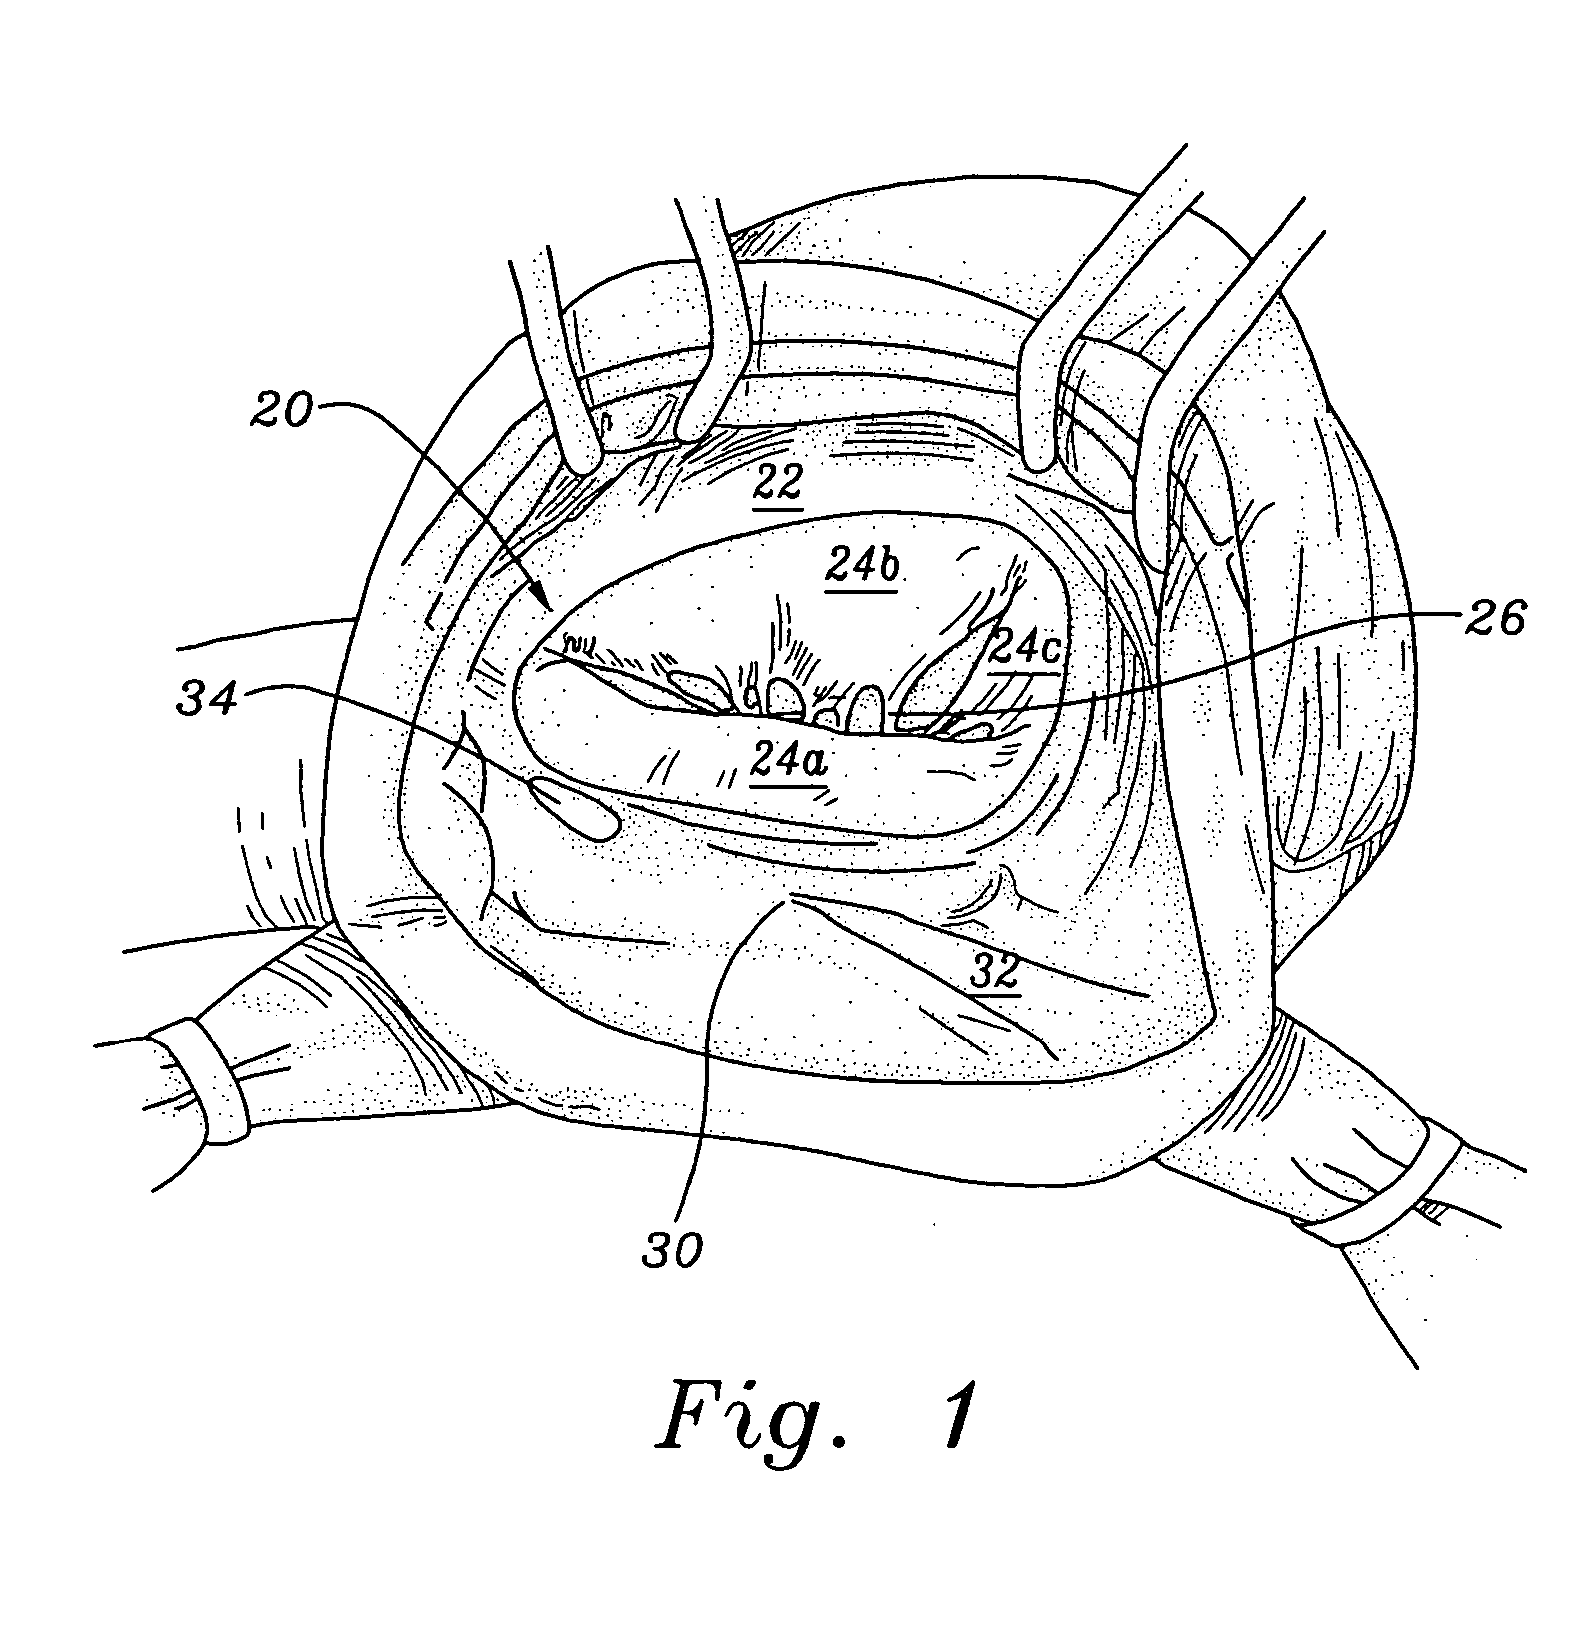 Three-dimensional annuloplasty ring and template